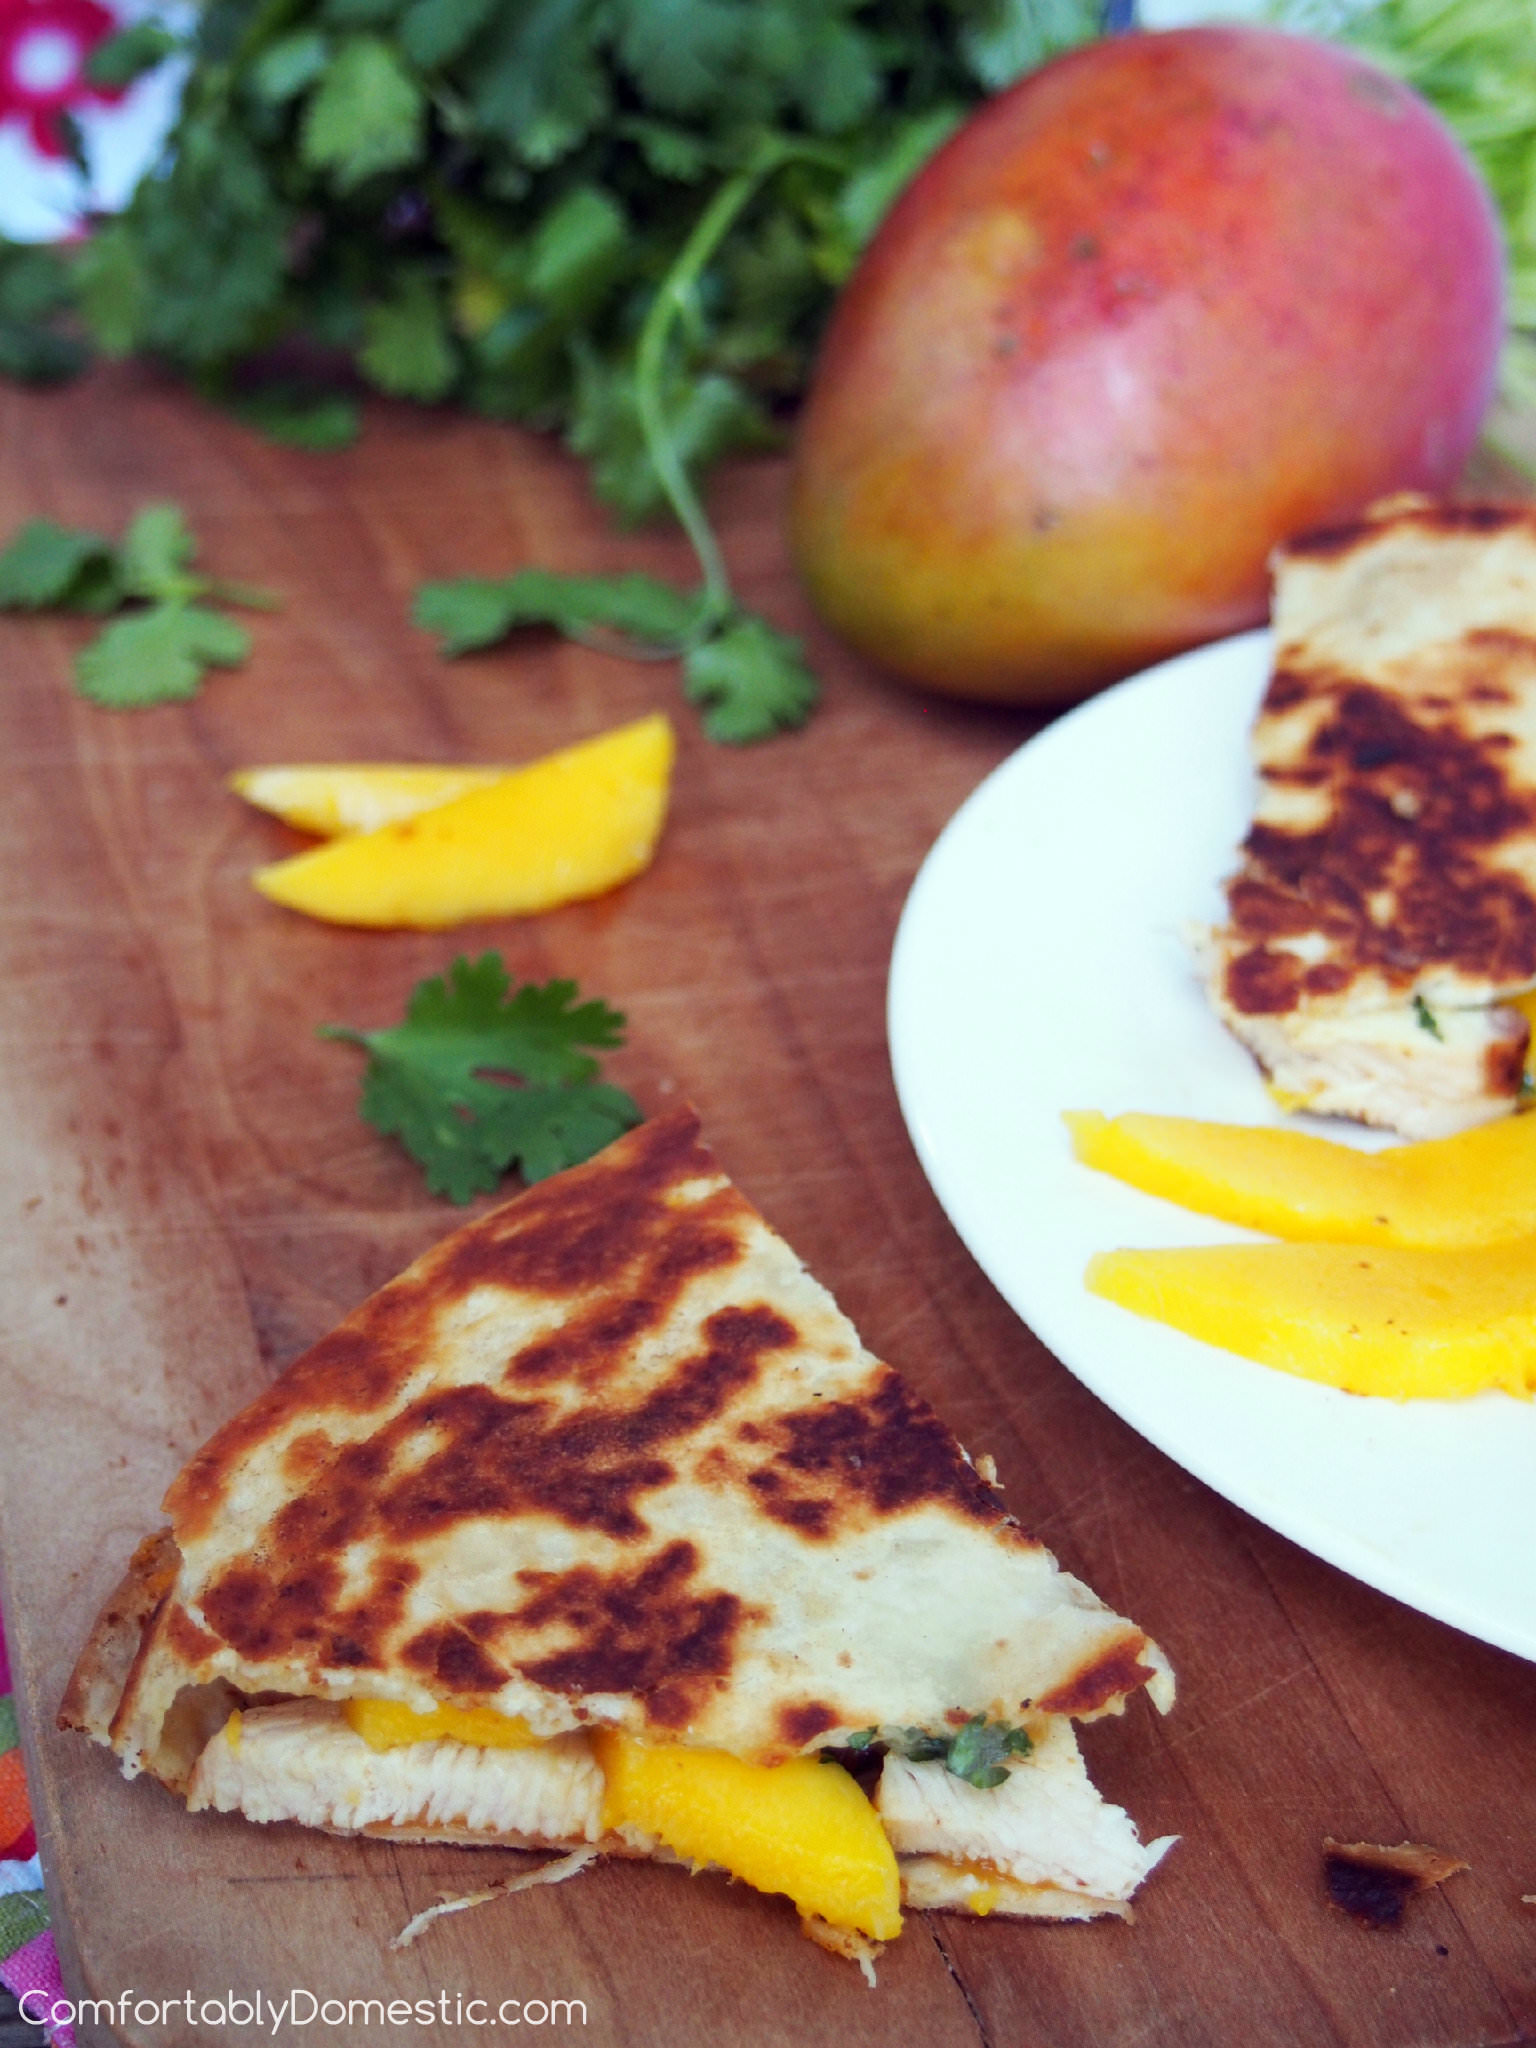 Mango chicken quesadillas start with tender grilled chicken, fresh mango slices, and creamy brie cheese. They're layered and toasted between buttery flour tortillas. They are a great use for leftover chicken, making a healthy lunch or quick snack. | ComfortablyDomestic.com